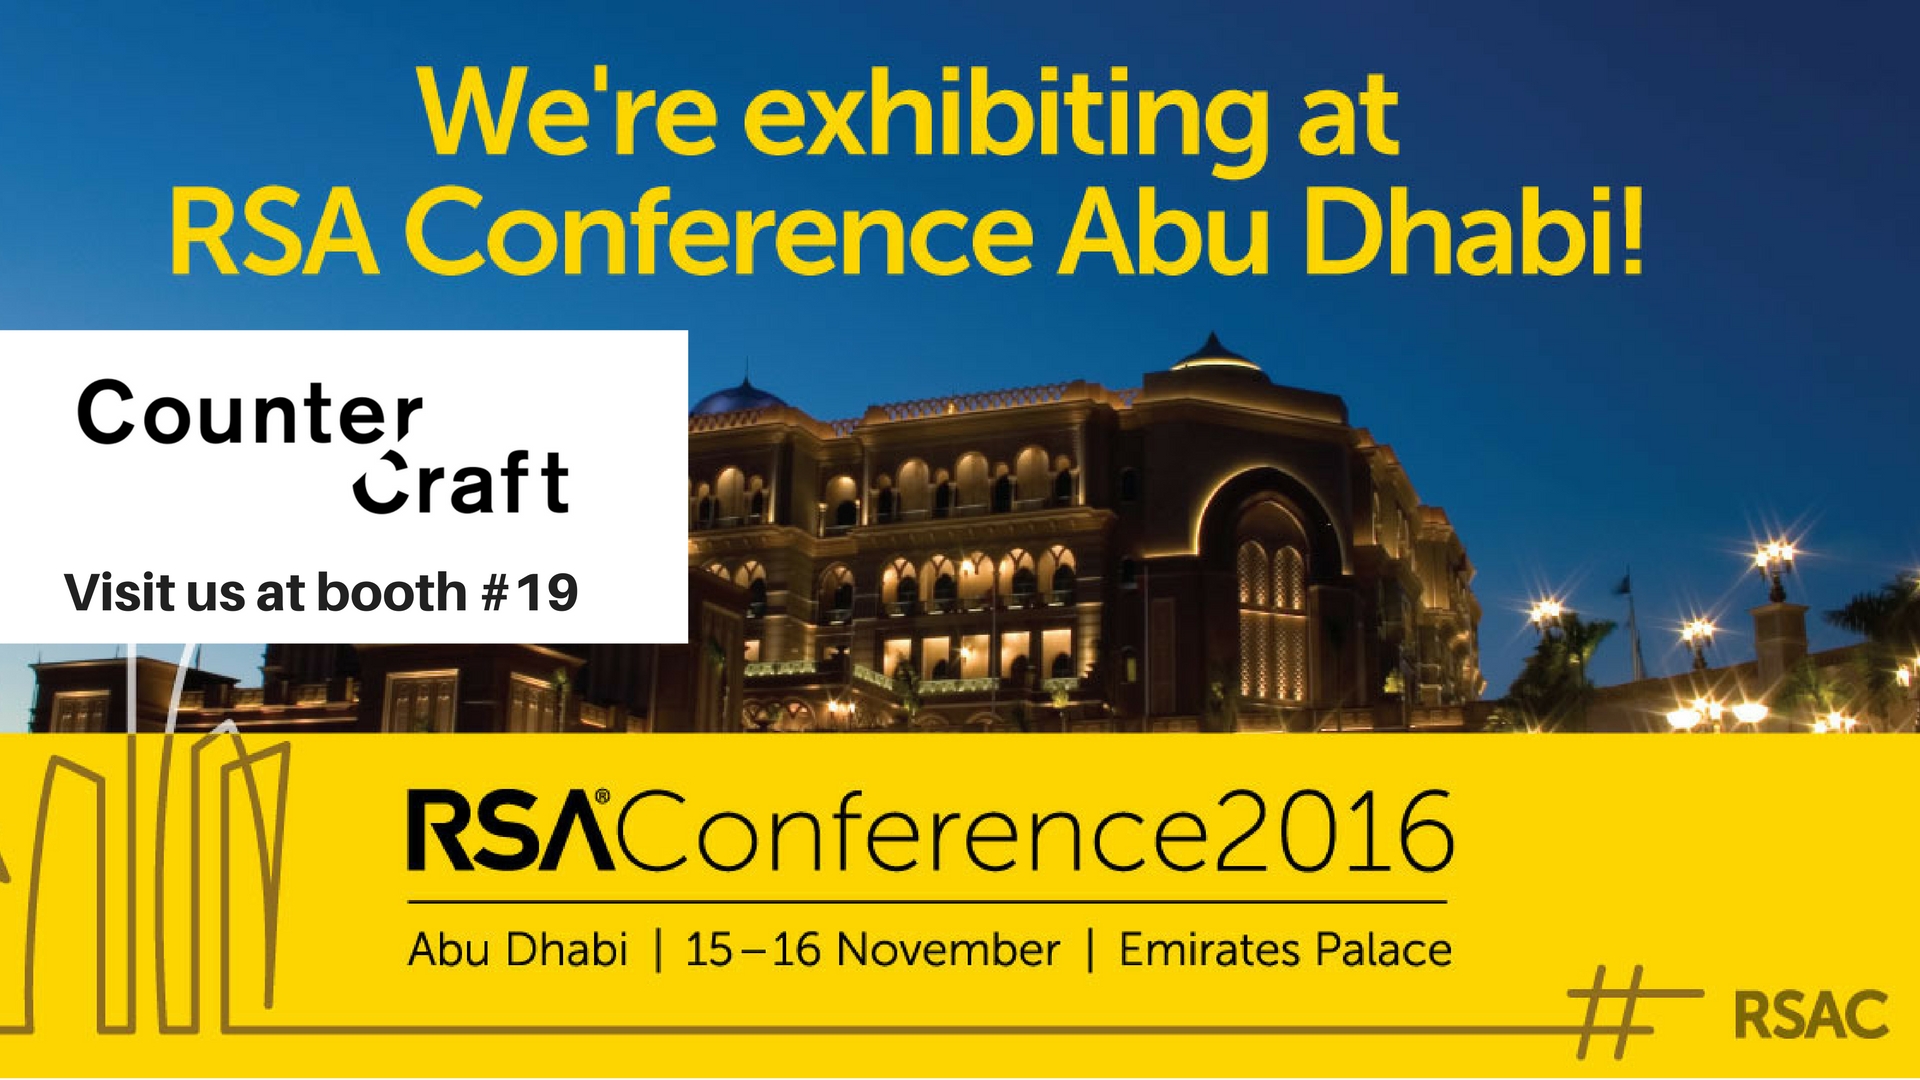 CounterCraft exhibiting at RSA Conference 2016 in Abu Dhabi أبوظبي